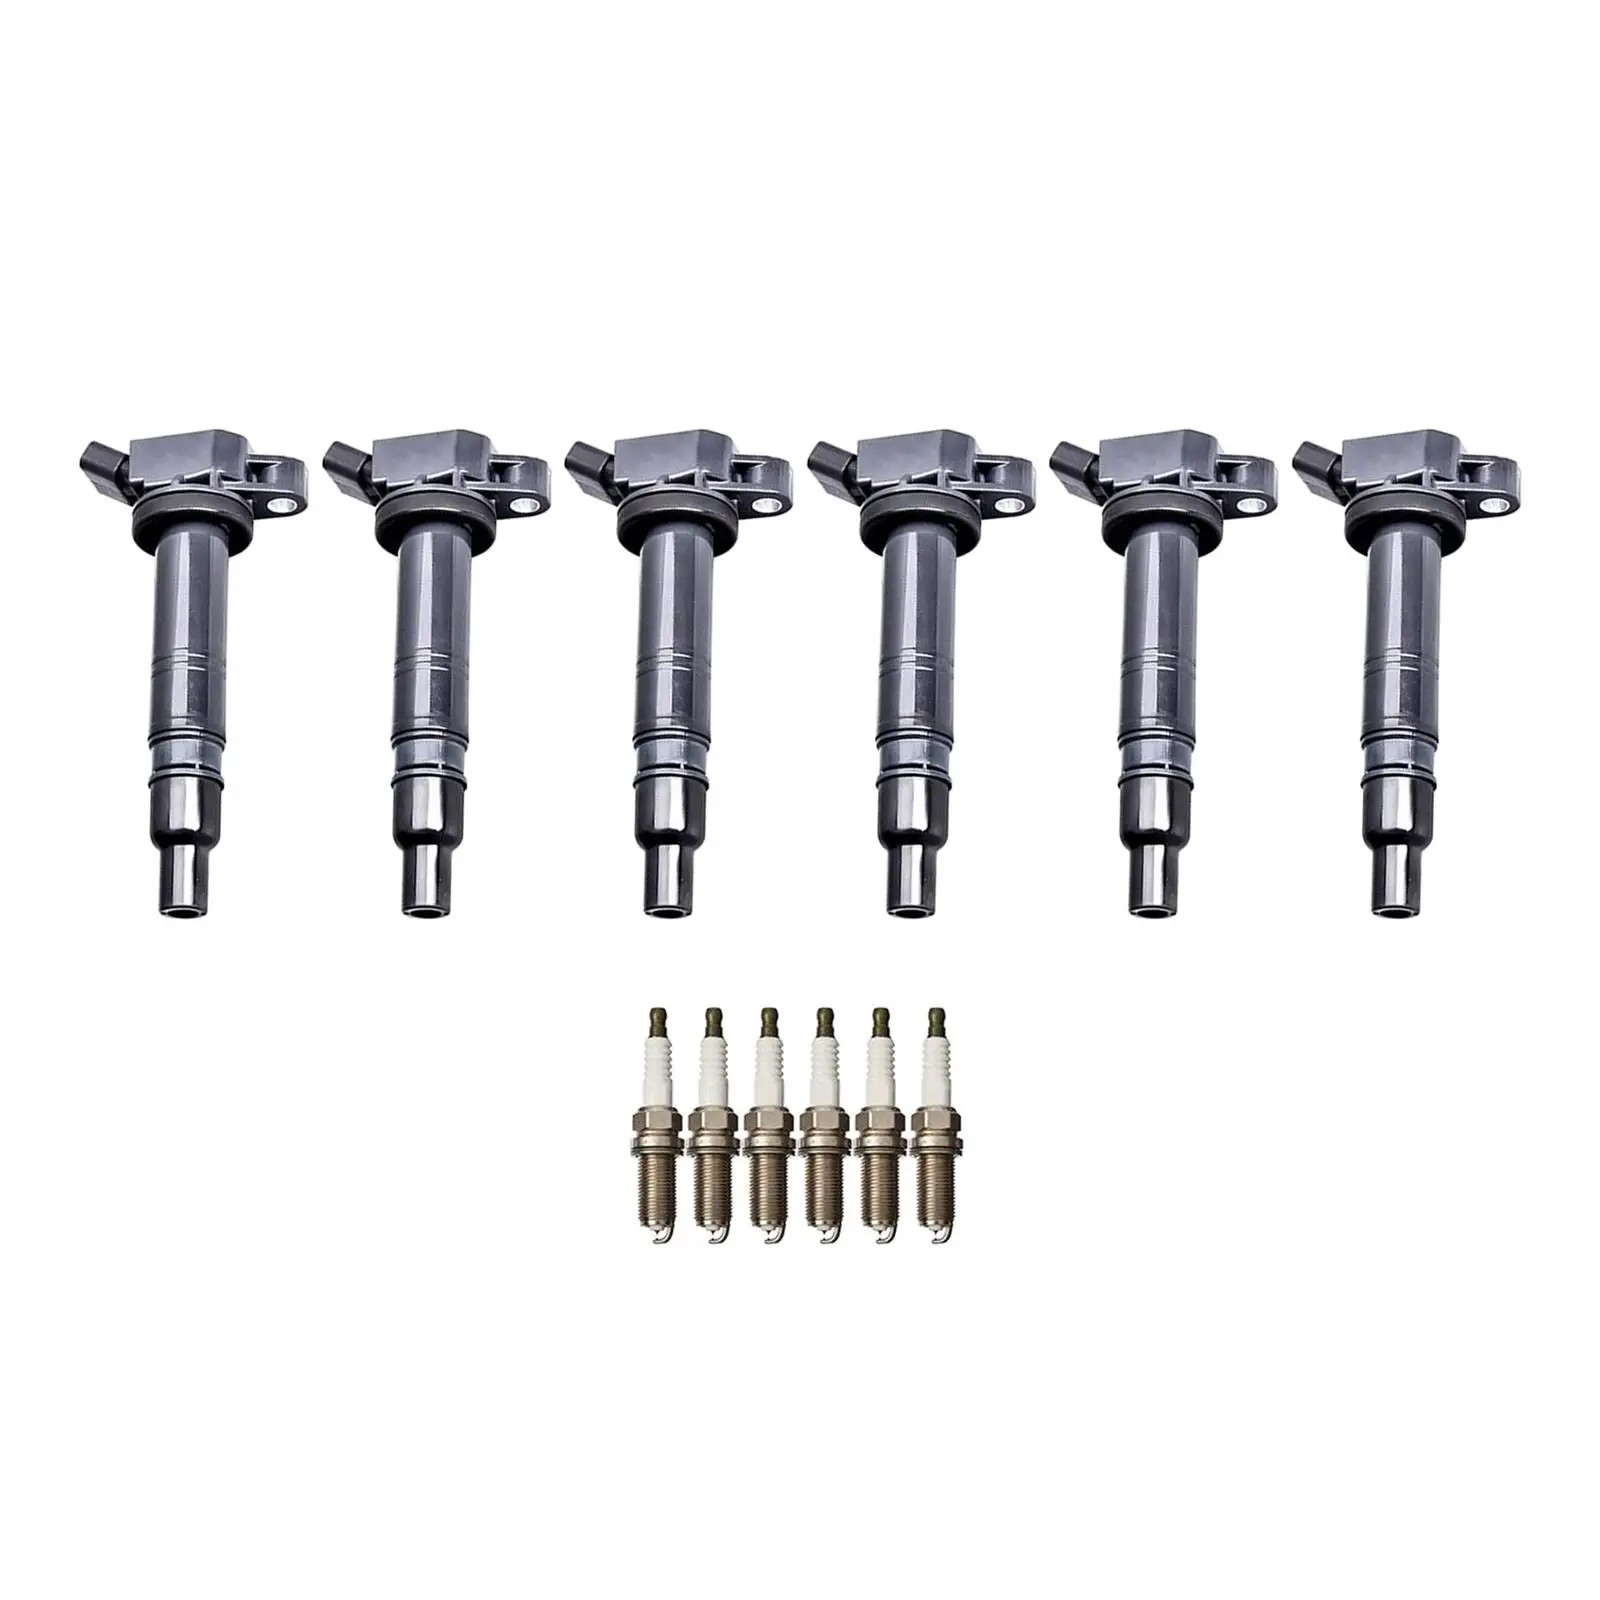 6 Ignition Coils 6 Iridium Spark Plugs IC3157AA470406 Automotive Parts Ignition Coil Set Durable for Toyota for tacoma 4 Runner